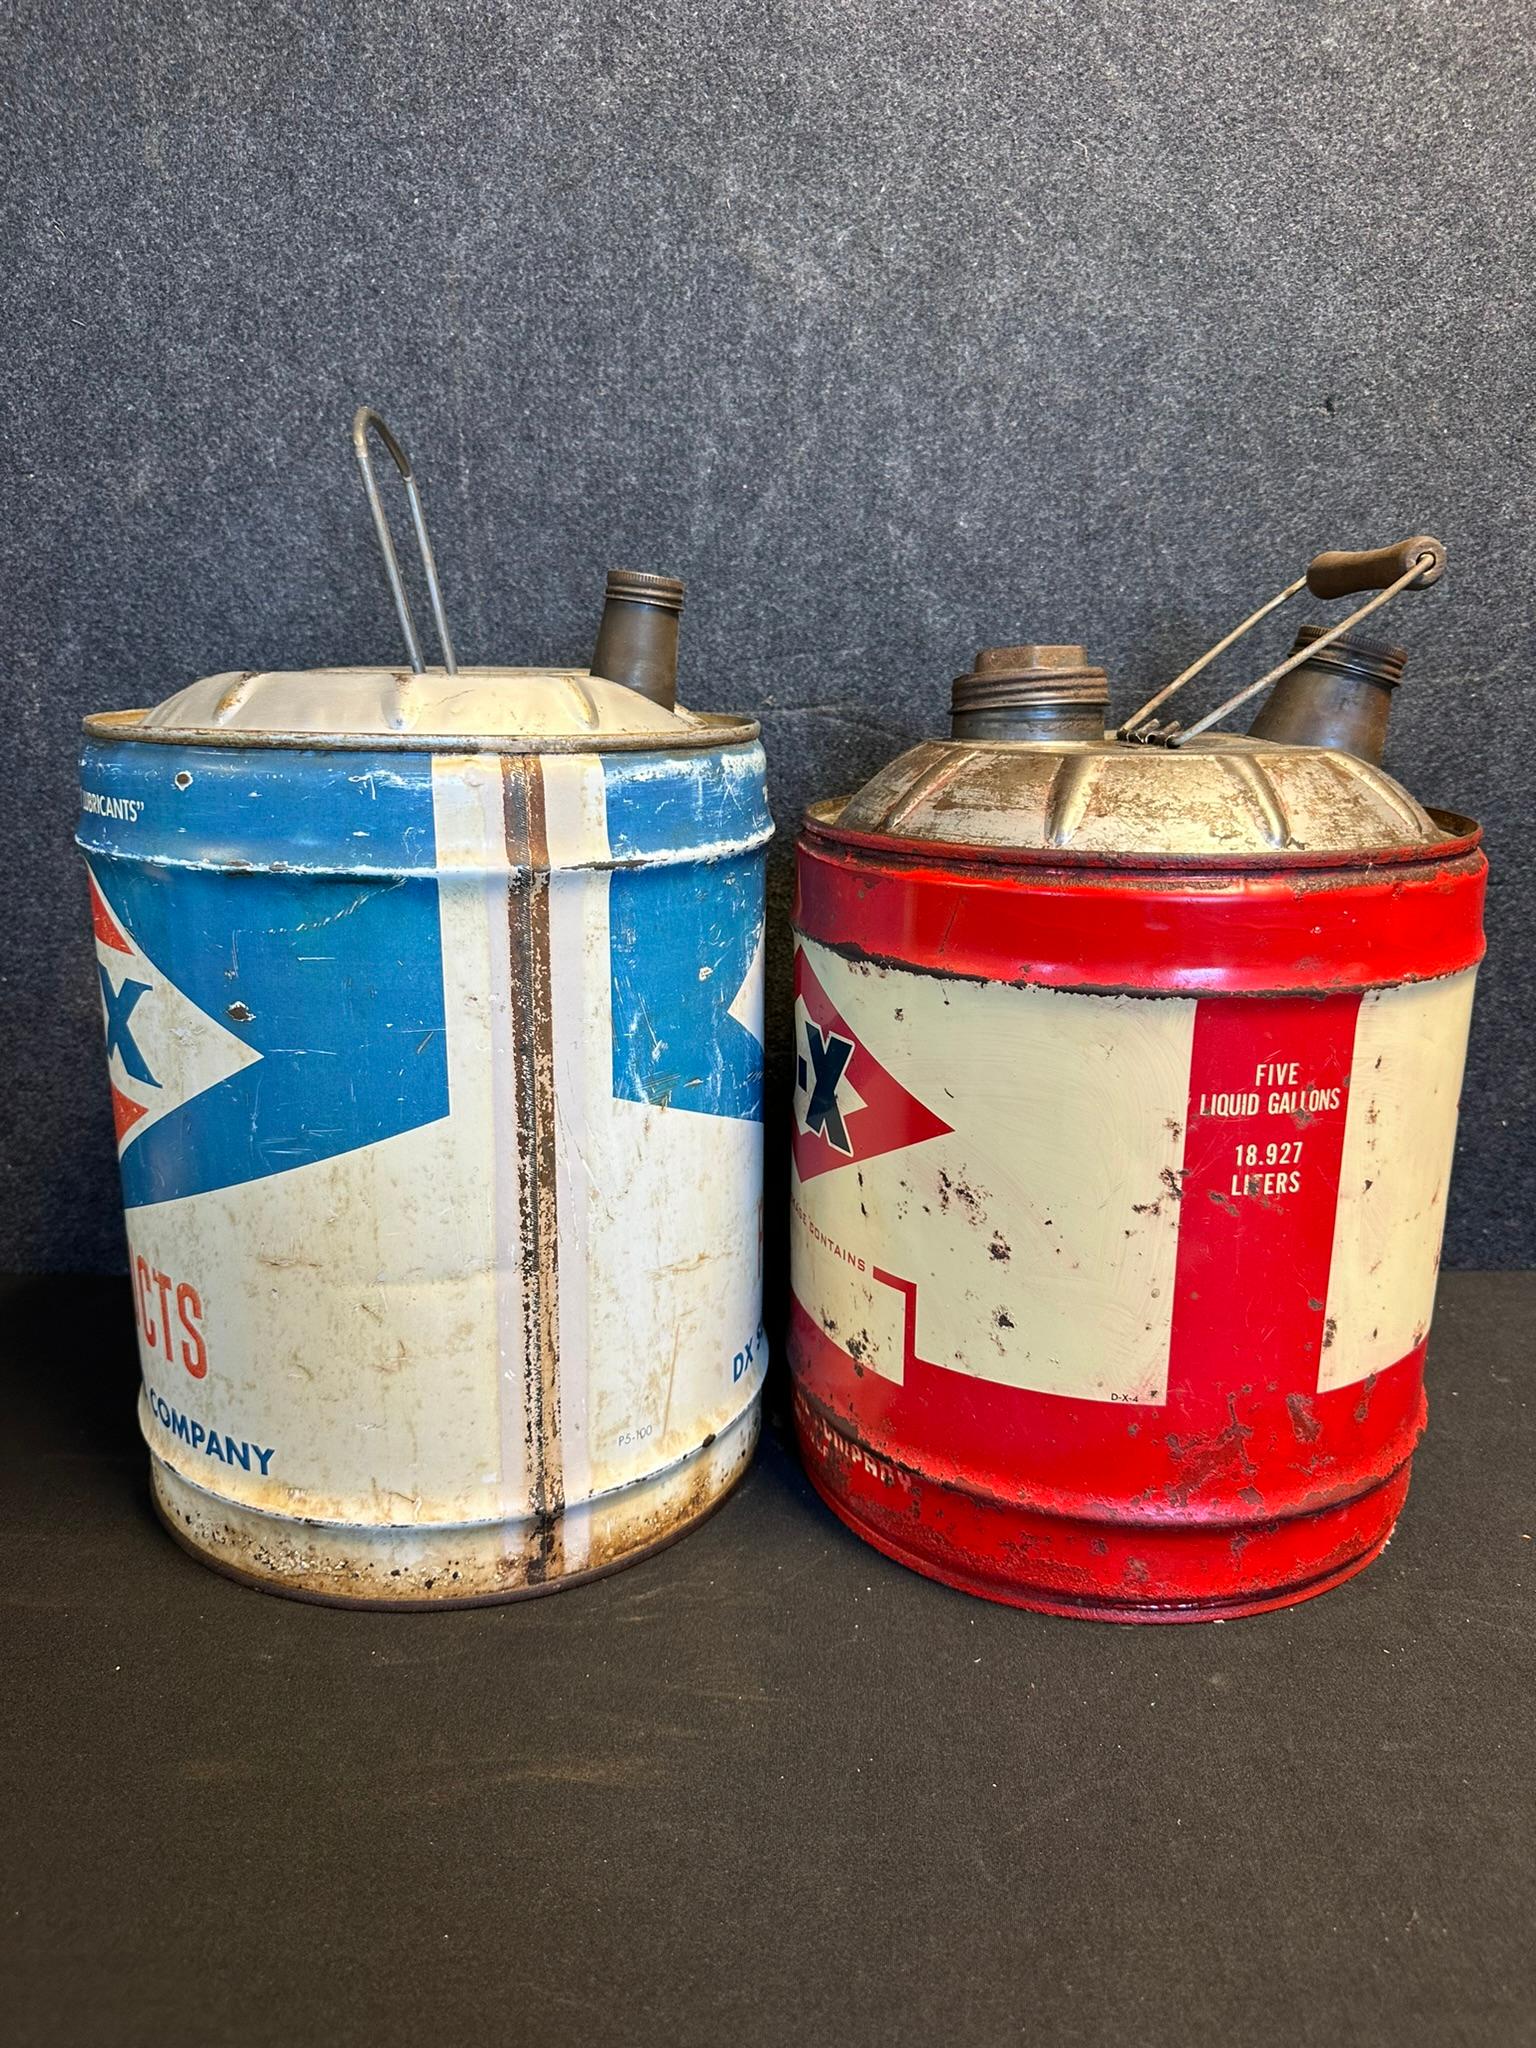 Pair DX 5 Gallon Motor Oil Cans